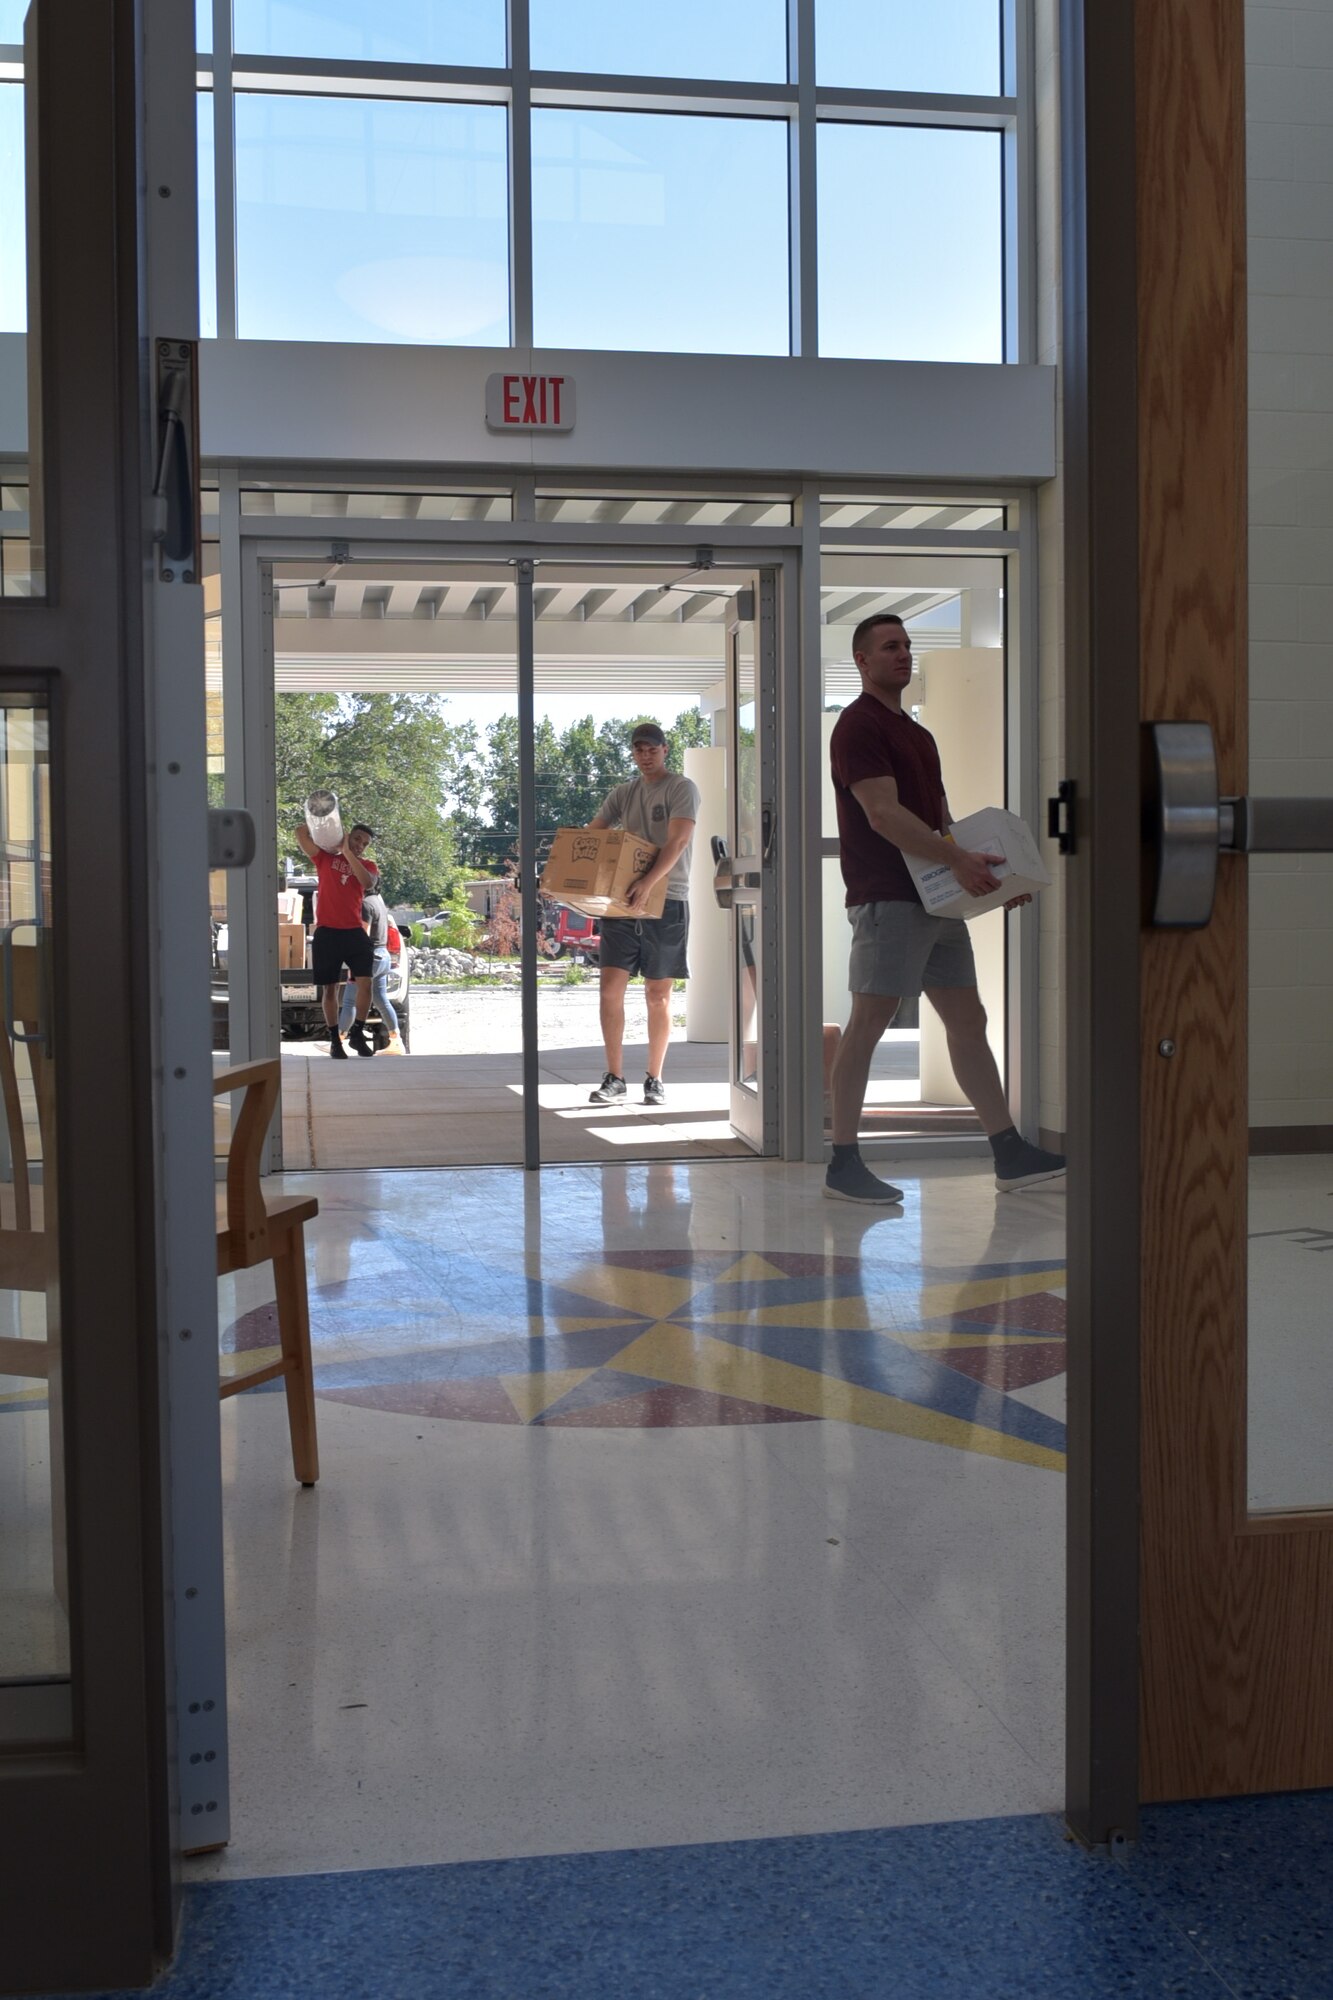 Airmen assigned to Seymour Johnson Air Force Base assist with moving equipment into the newly constructed Meadow Lane Elementary School June 14, 2019, in Goldsboro, North Carolina.